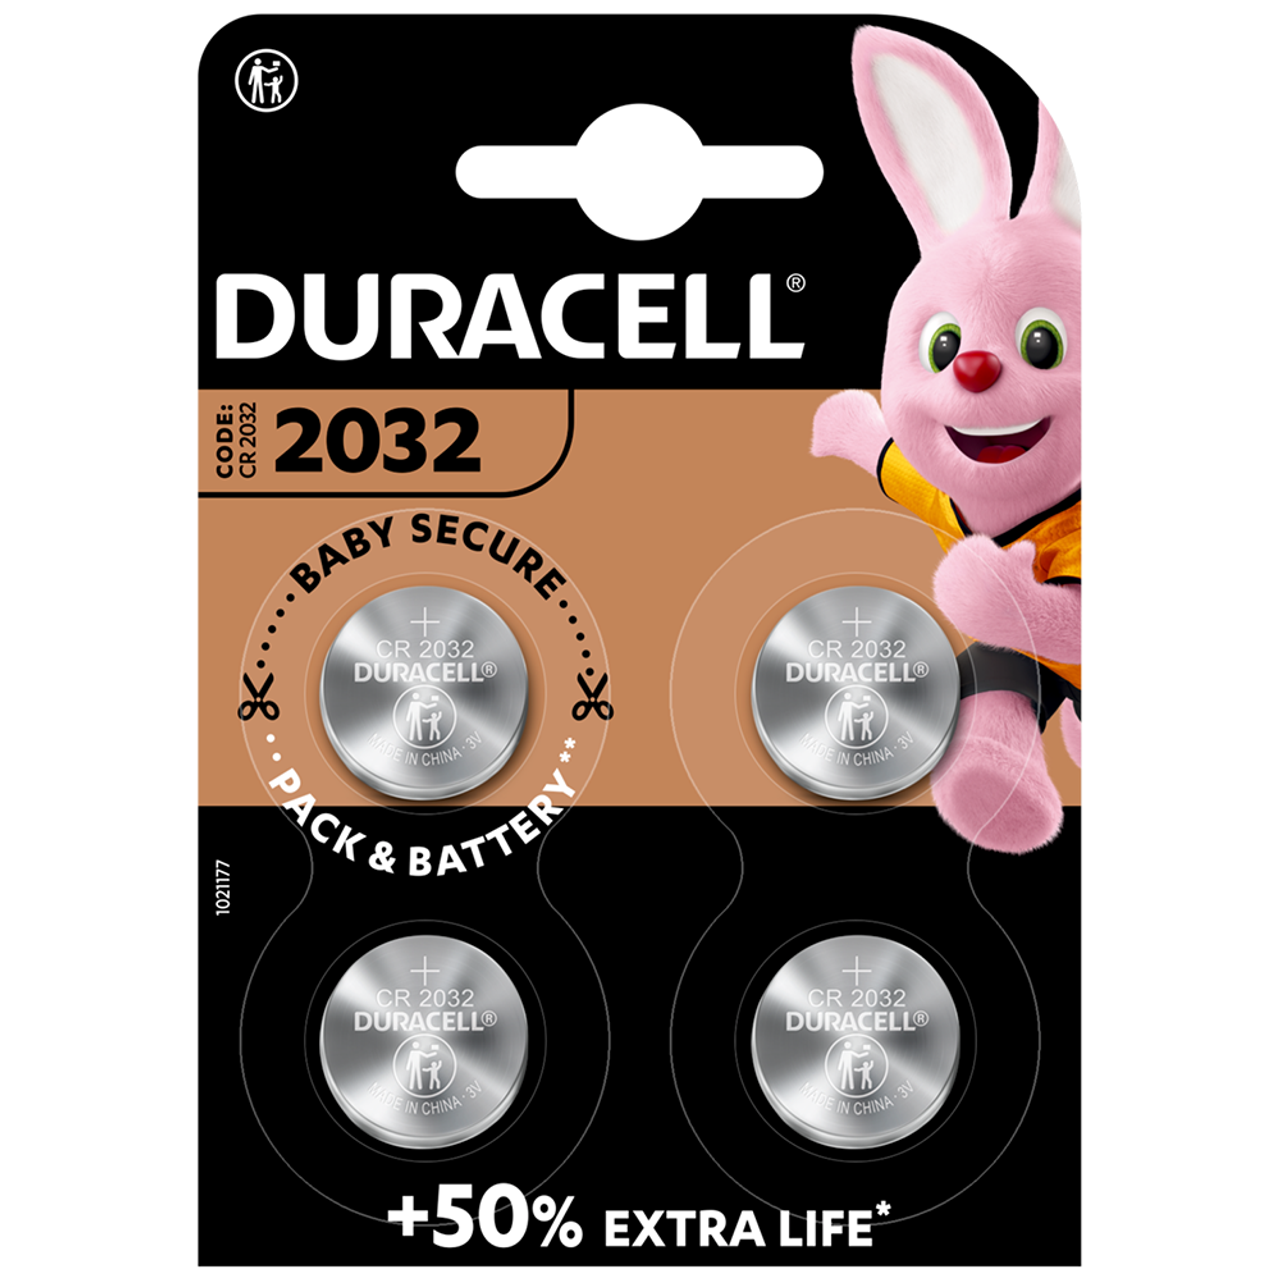 Duracell CR2032 3V Lithium Coin Battery, 10 pcs, 2032 Coin Button Cell  Battery, DL2032